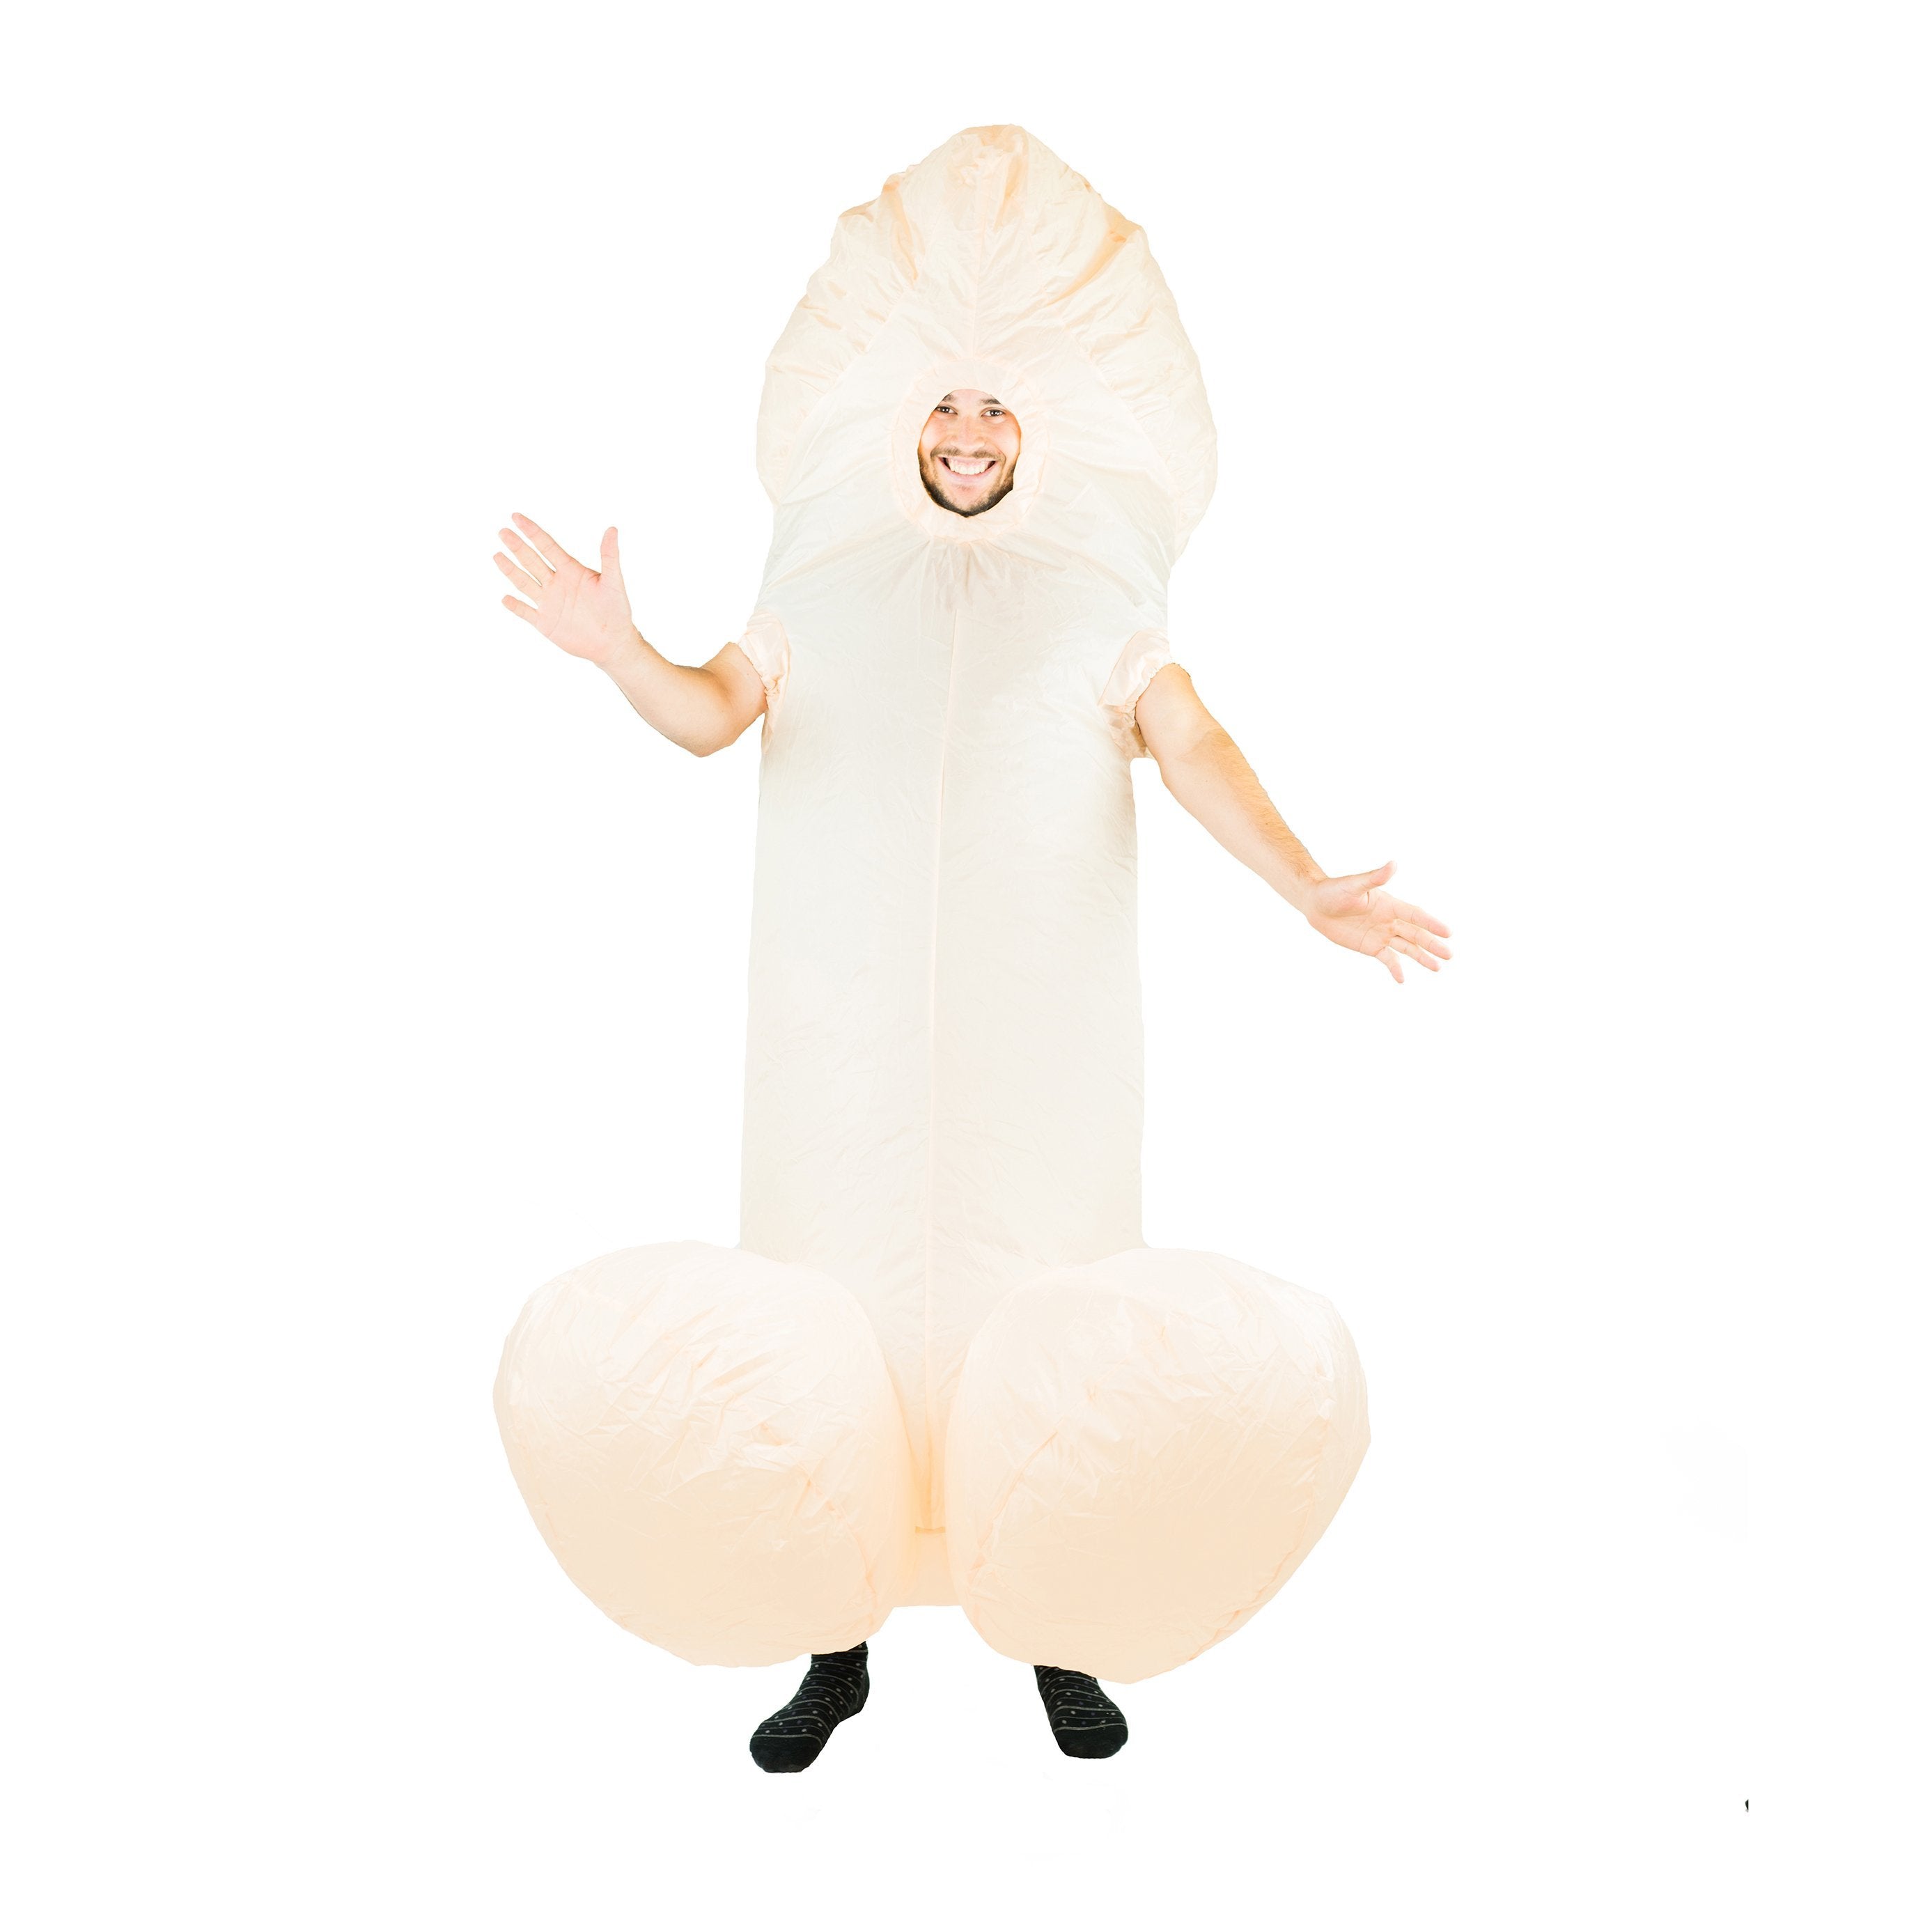 Bodysocks - White Inflatable Willy Costume